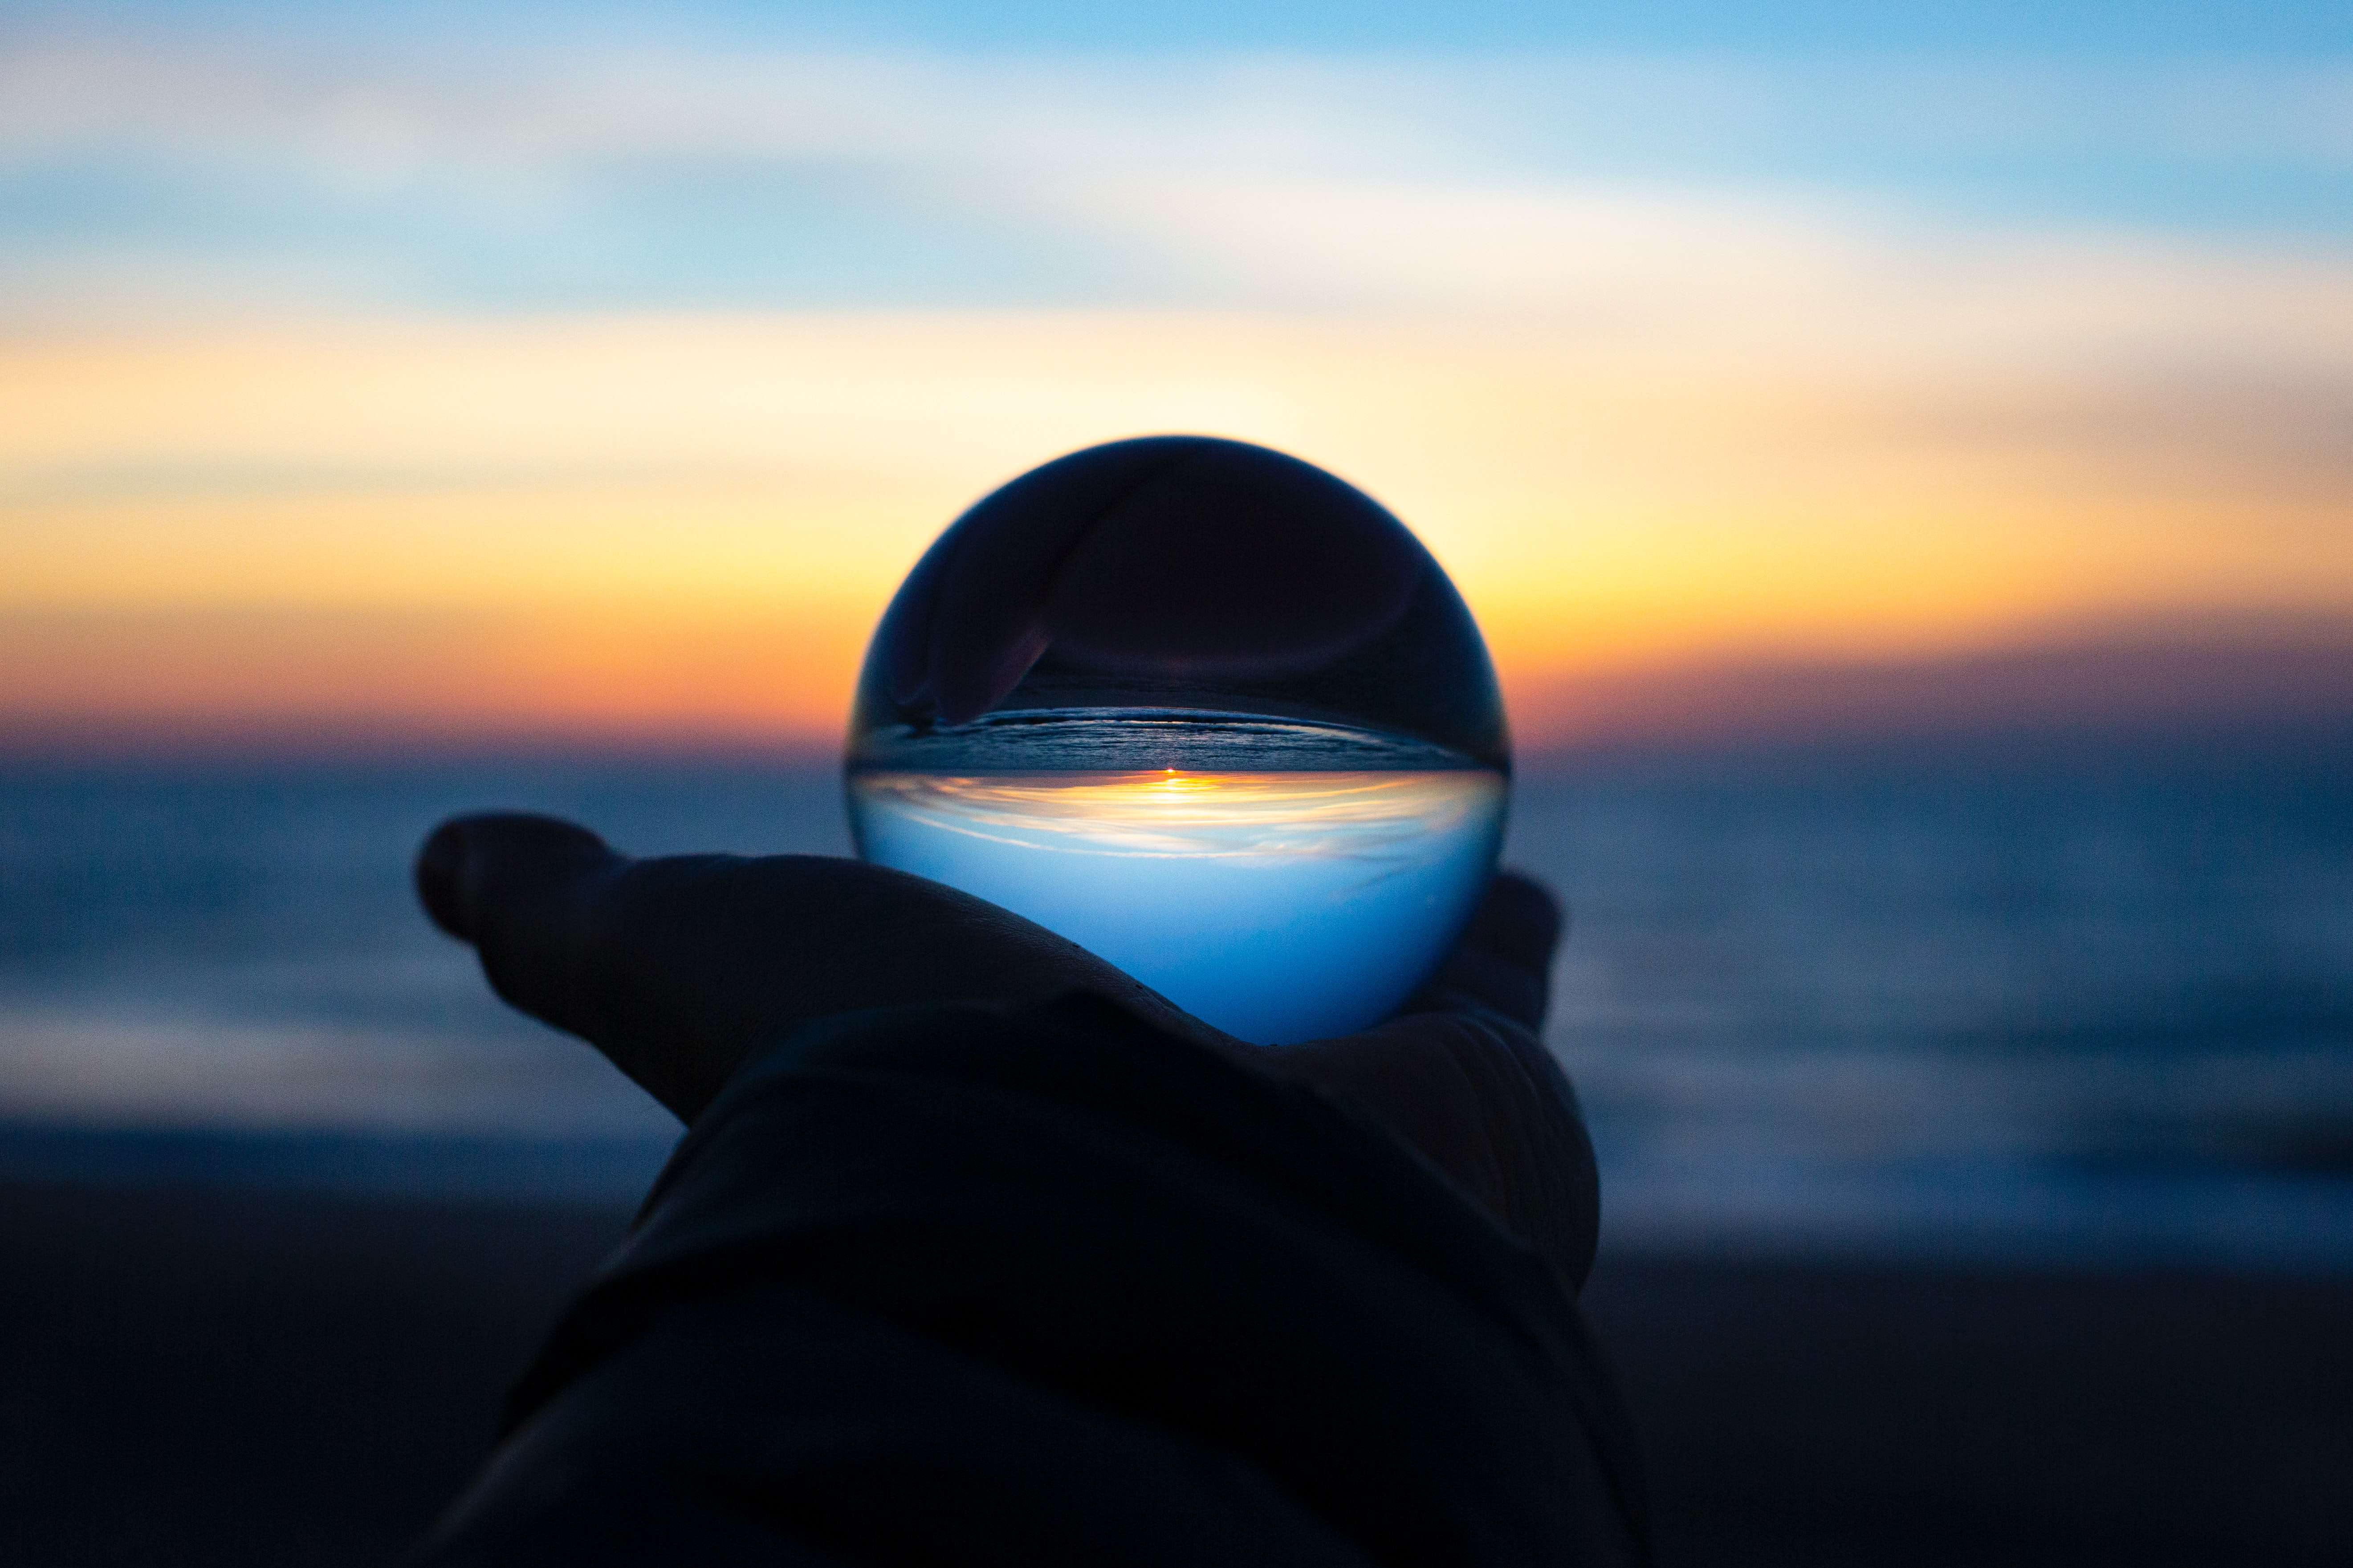 Hand holding a glass ball by the ocean at sunrise